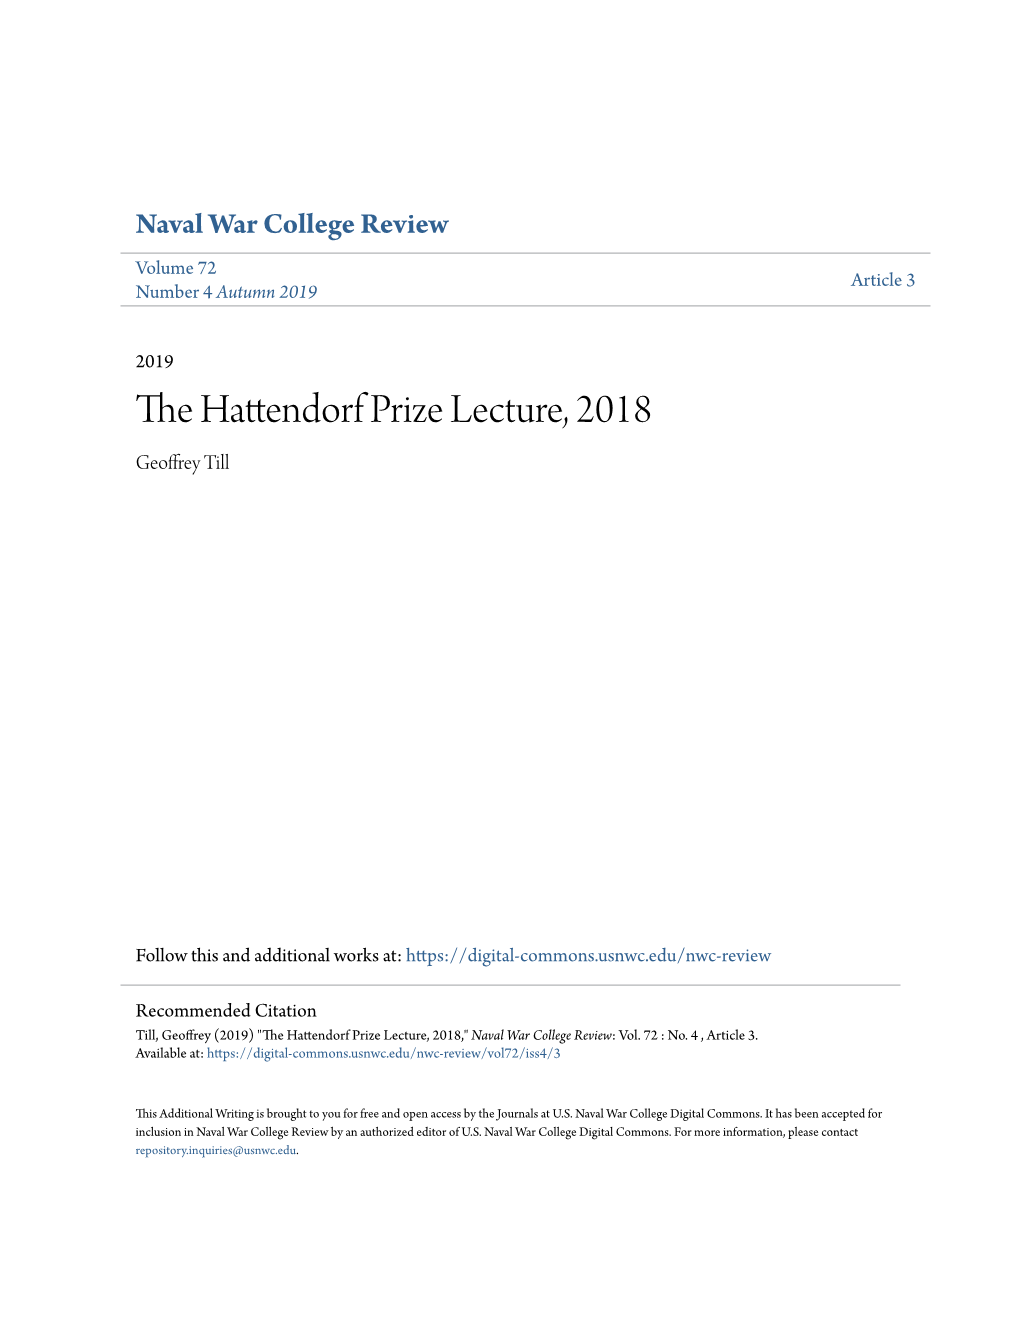 The Hattendorf Prize Lecture, 2018